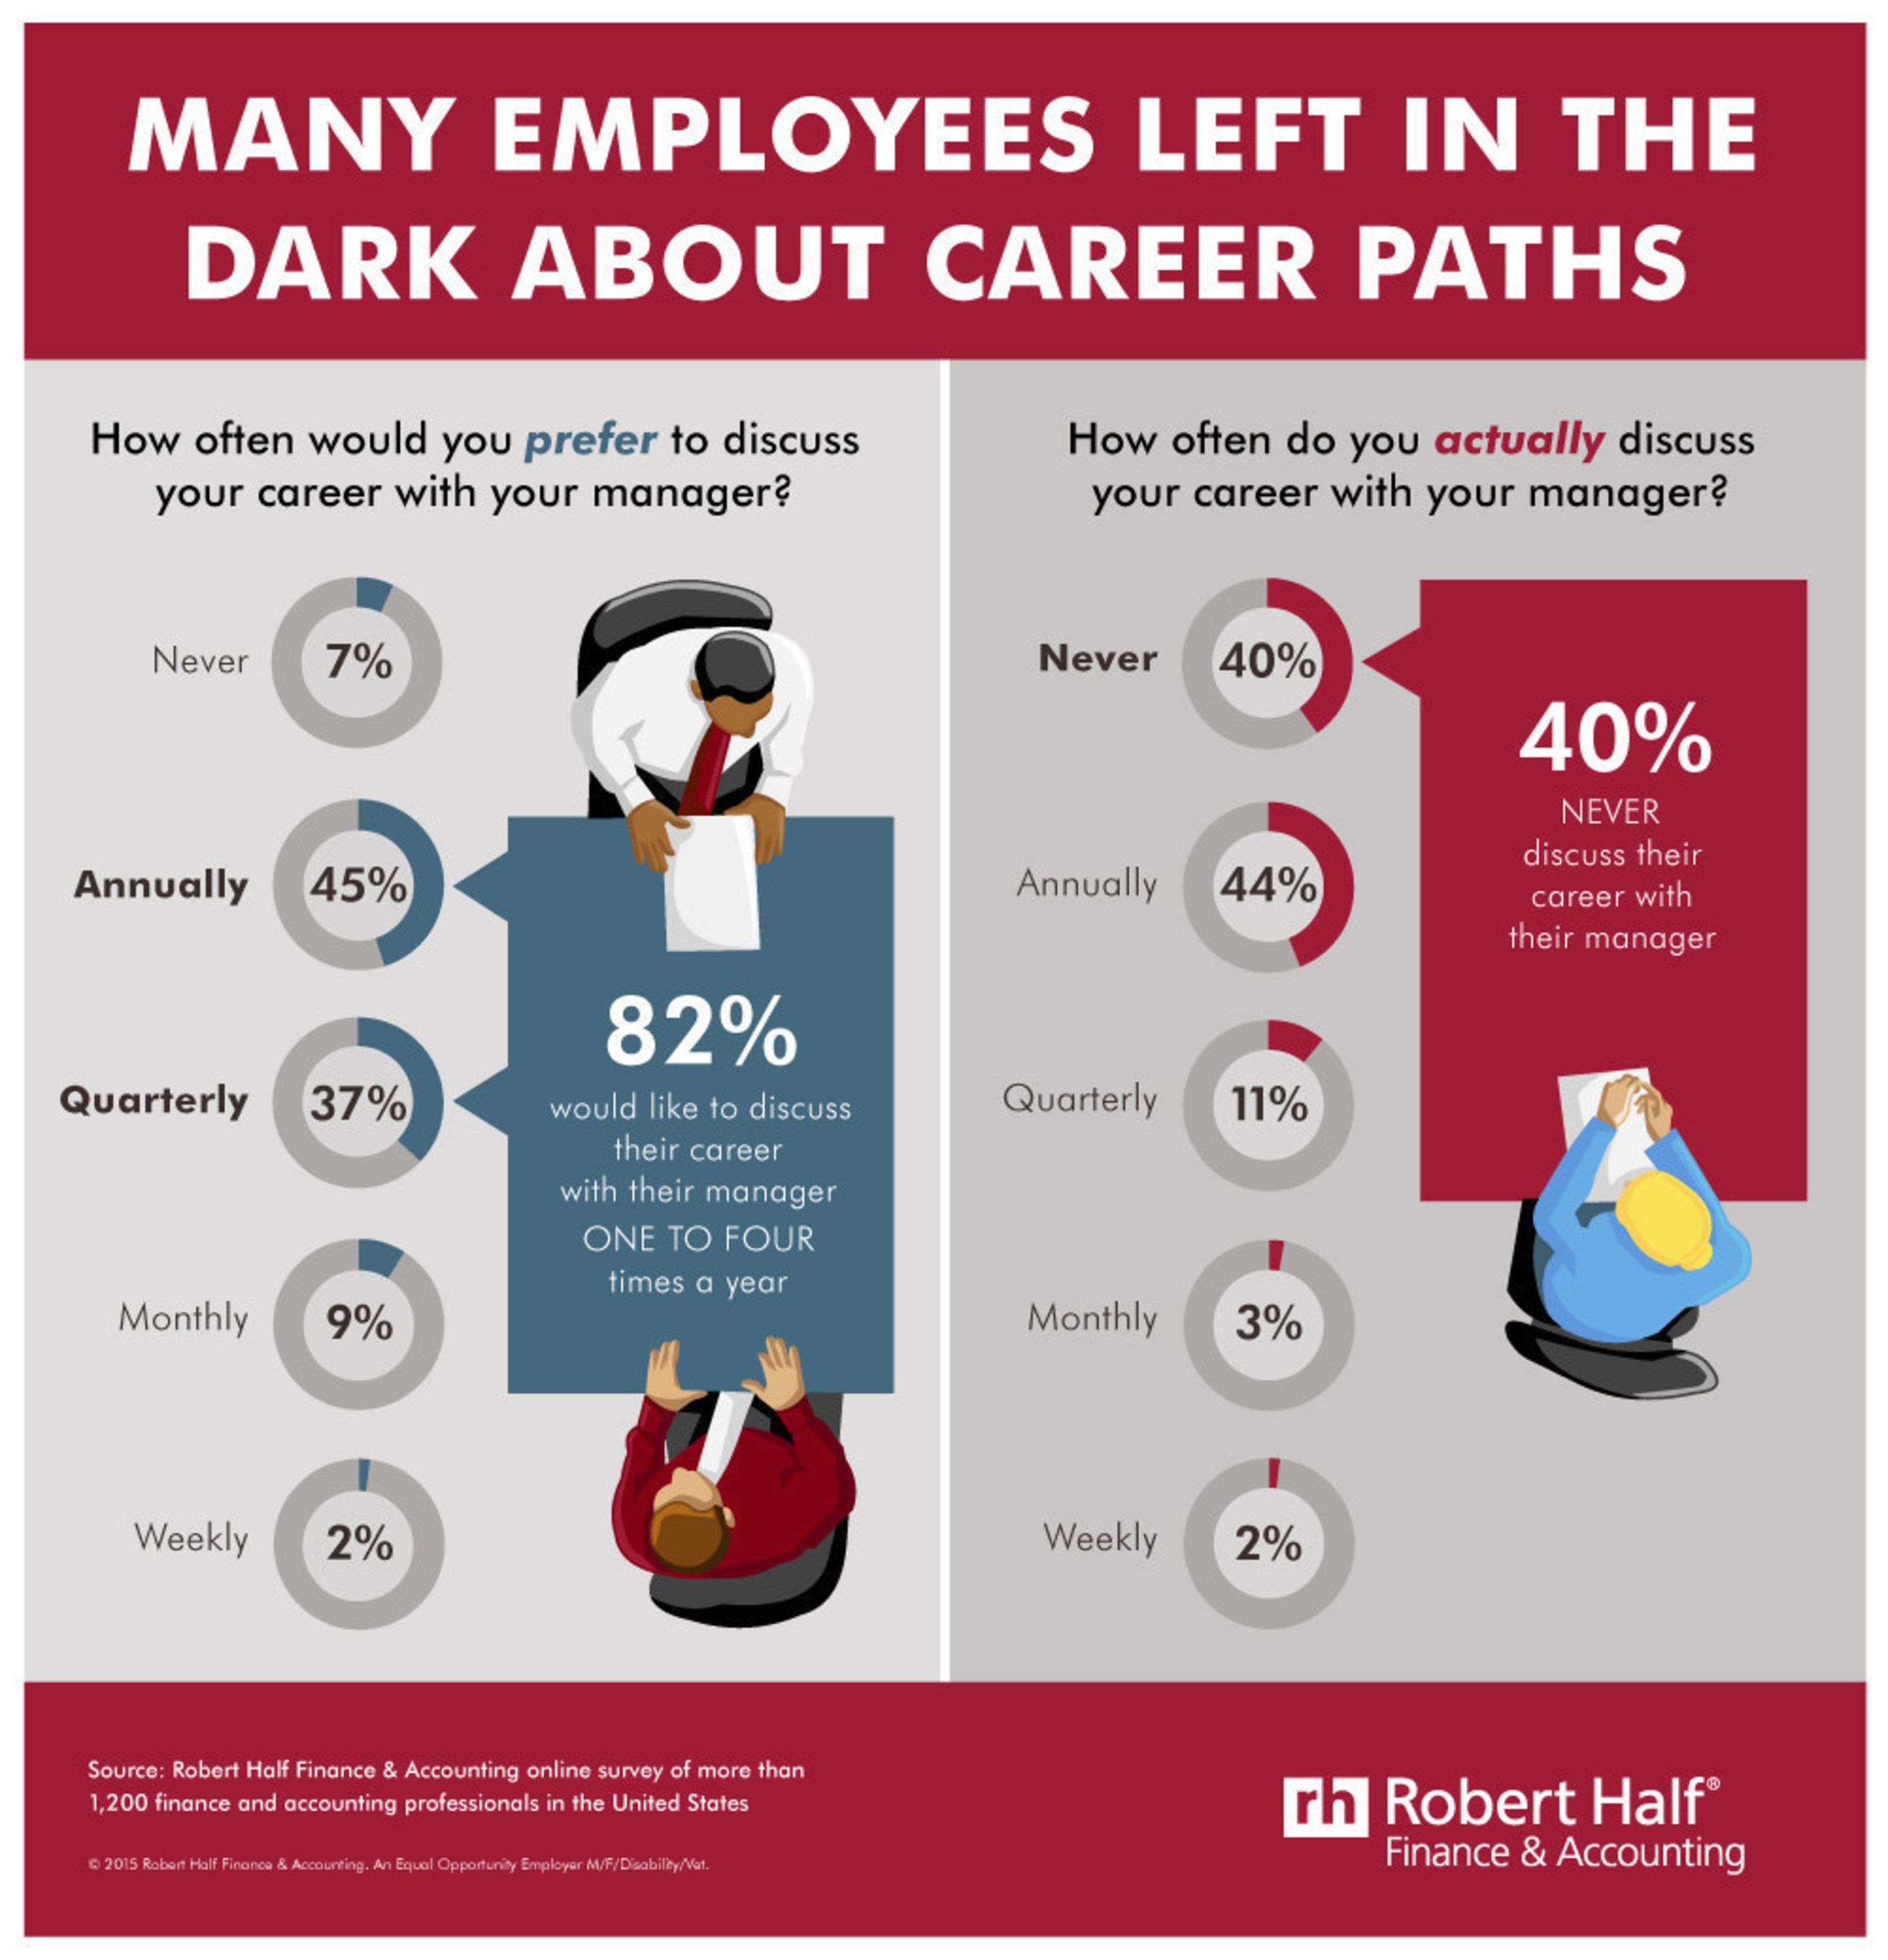 Many Employees Left in the Dark About Career Paths